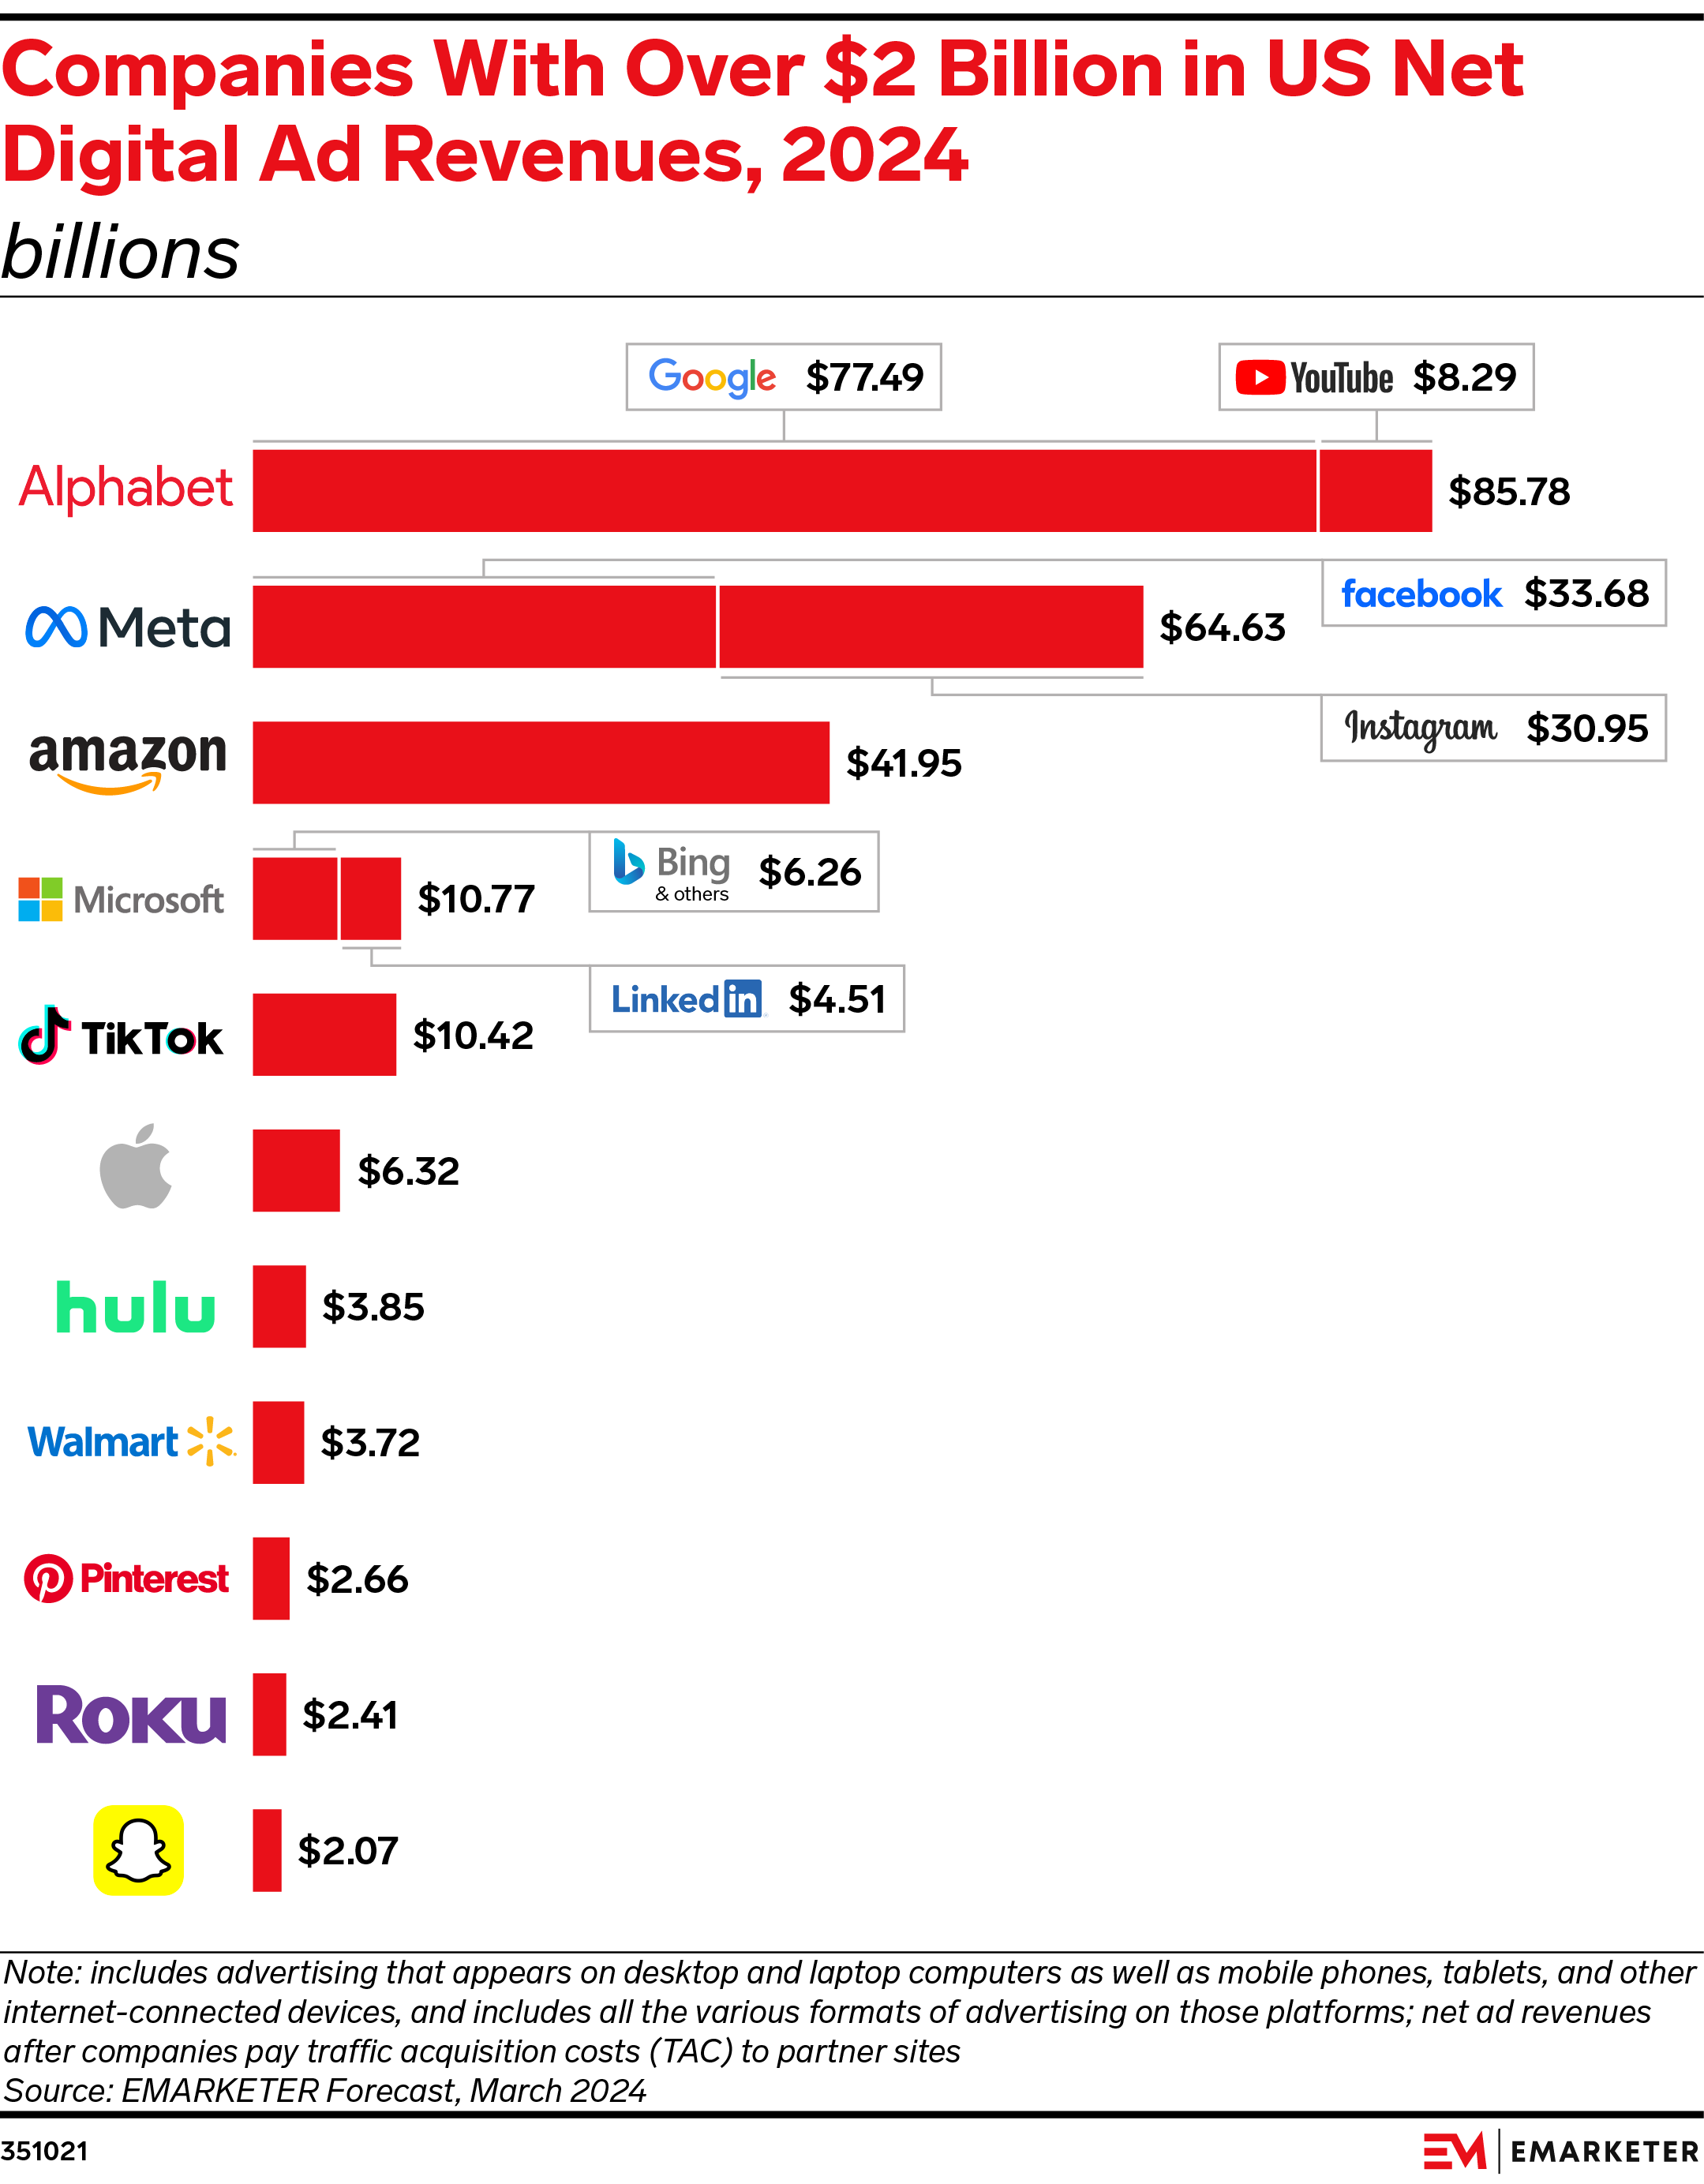 Companies With Over $2 Billion in US Net Digital Ad Revenues, 2024 (billions)